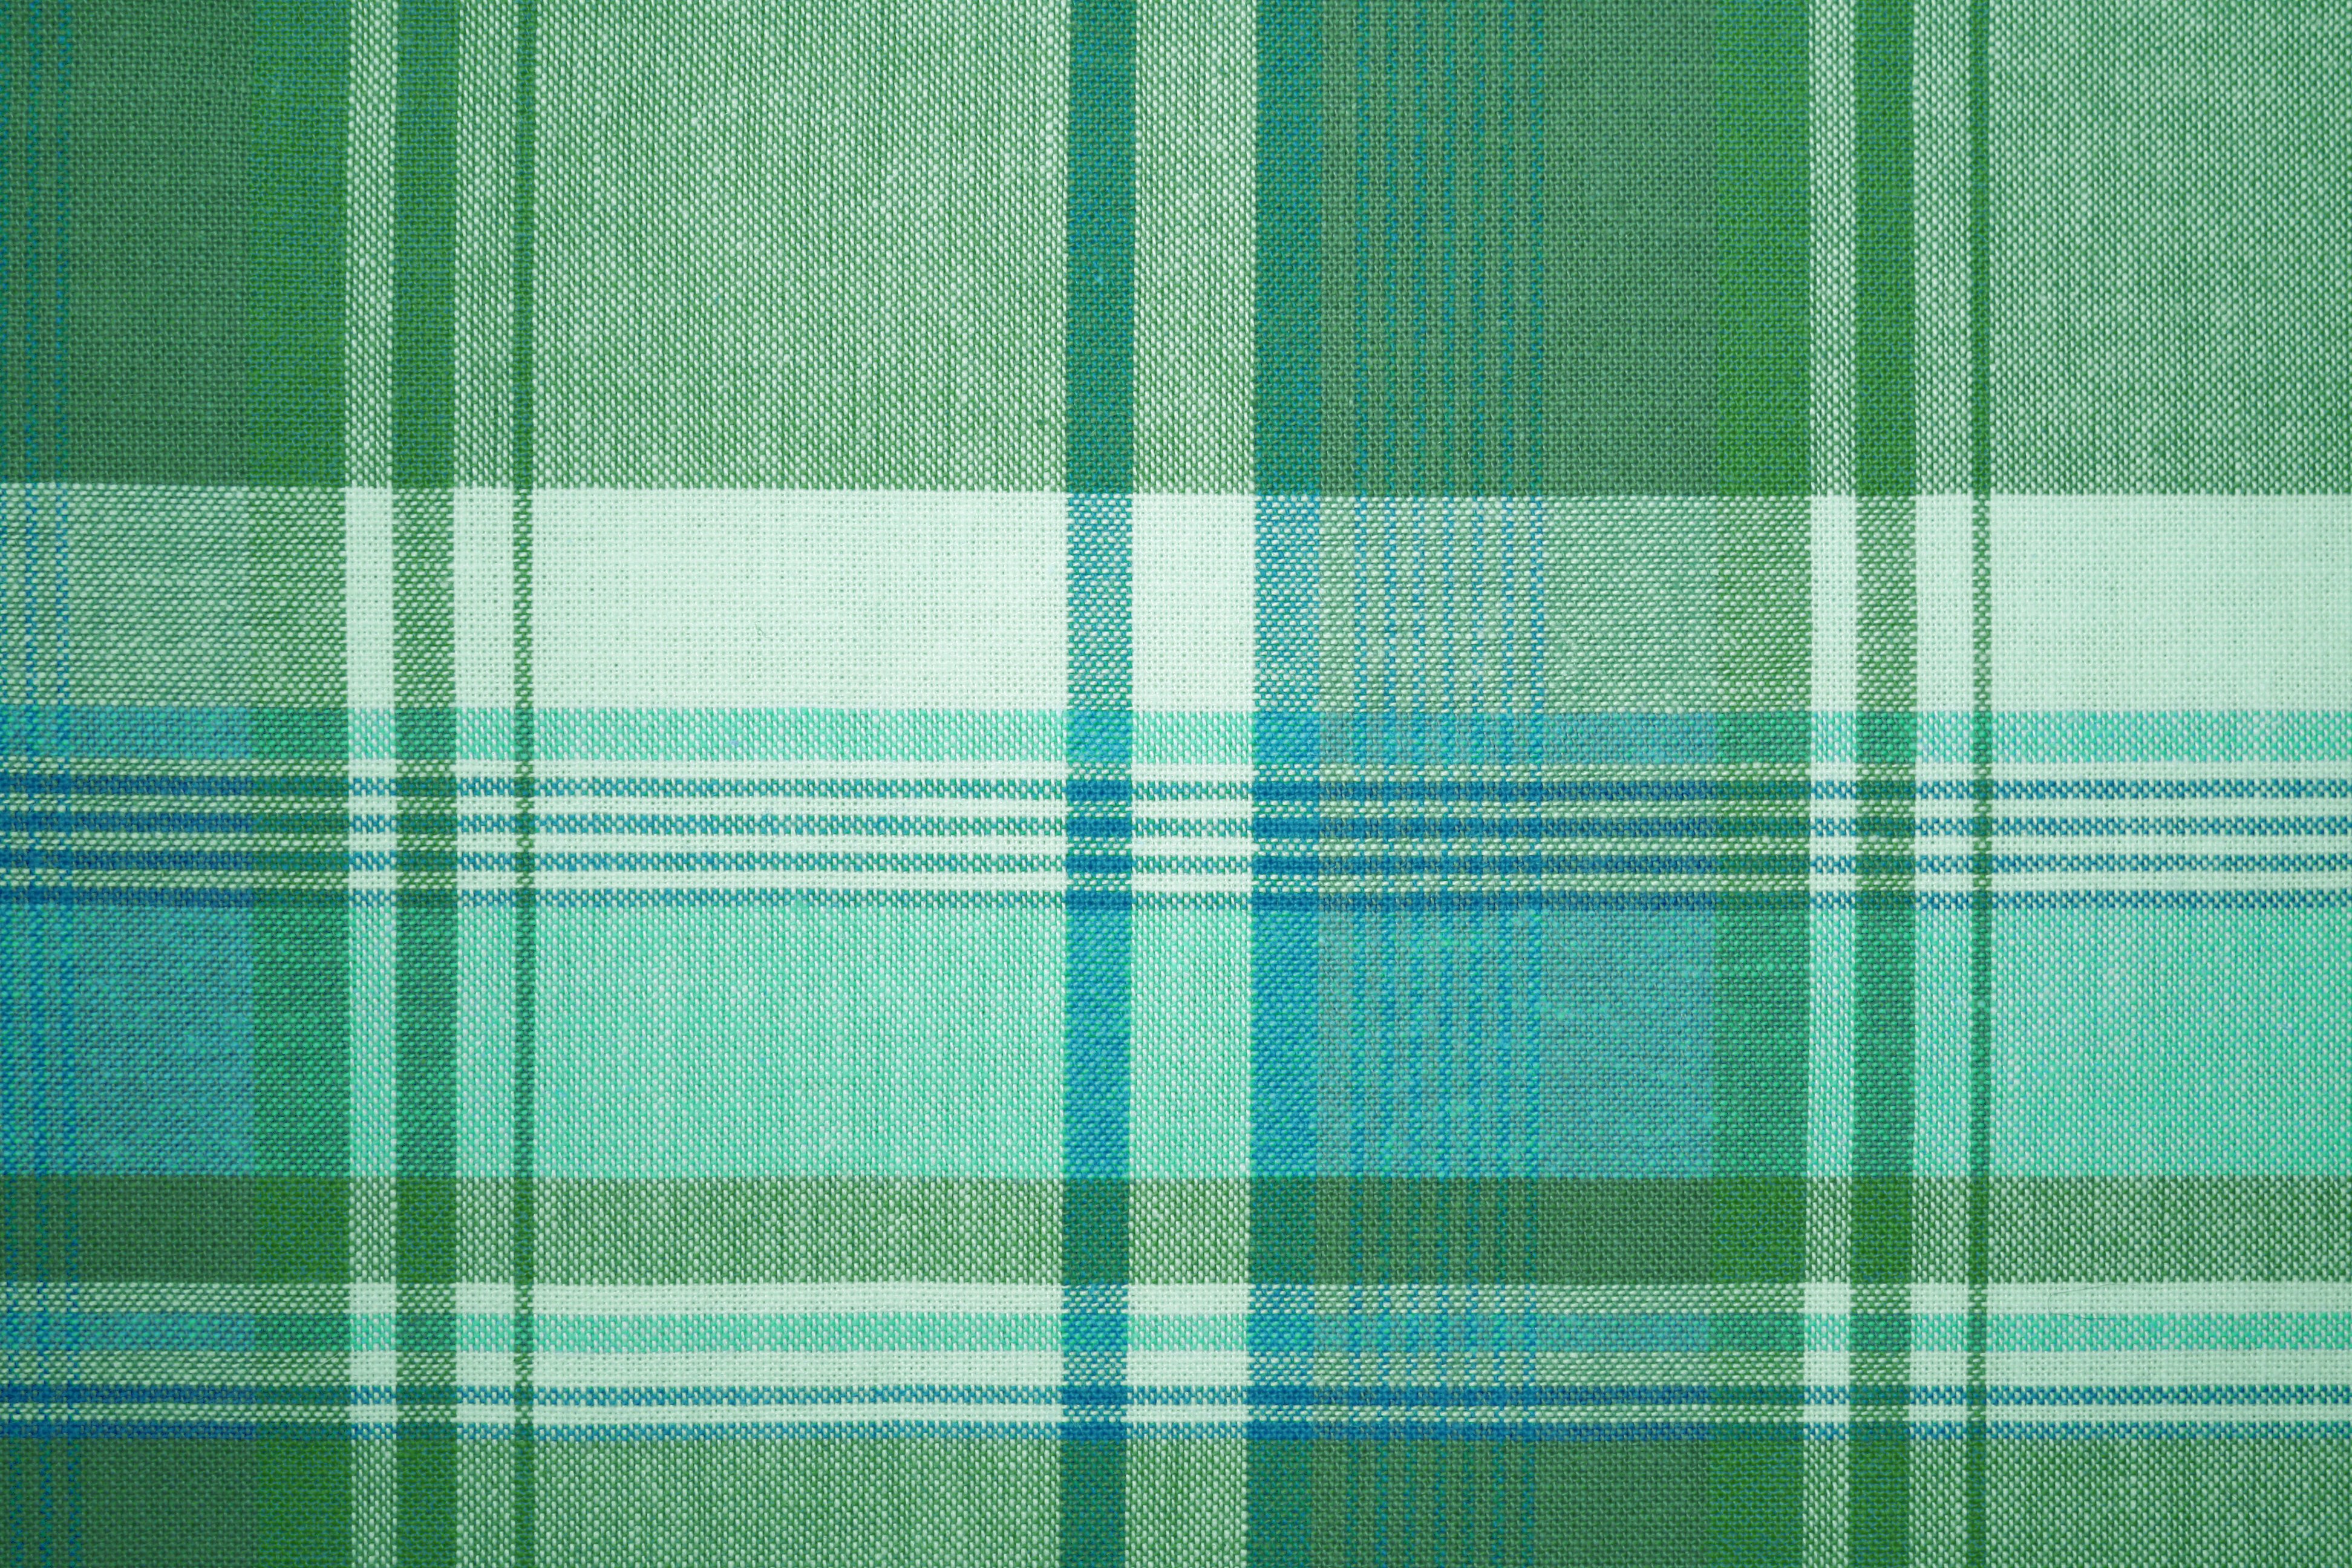 Green and Turquoise Plaid Fabric Texture Picture | Free Photograph ...